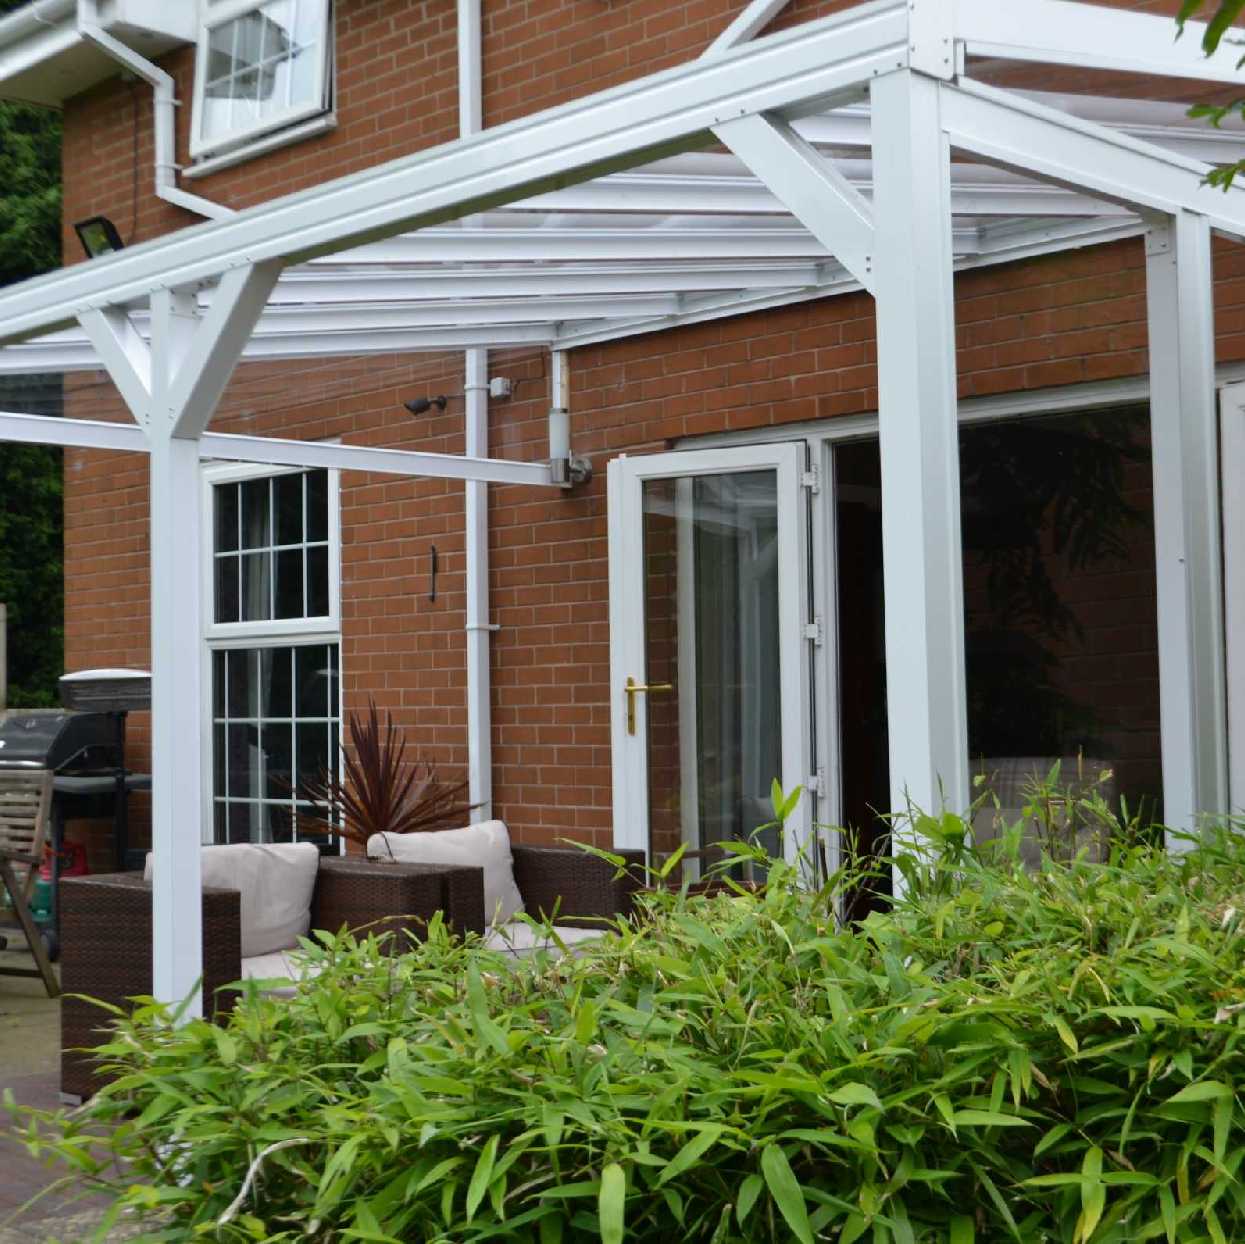 Omega Smart Lean-To Canopy, White with 6mm Glass Clear Plate Polycarbonate Glazing - 9.8m (W) x 3.5m (P), (5) Supporting Posts from Omega Build